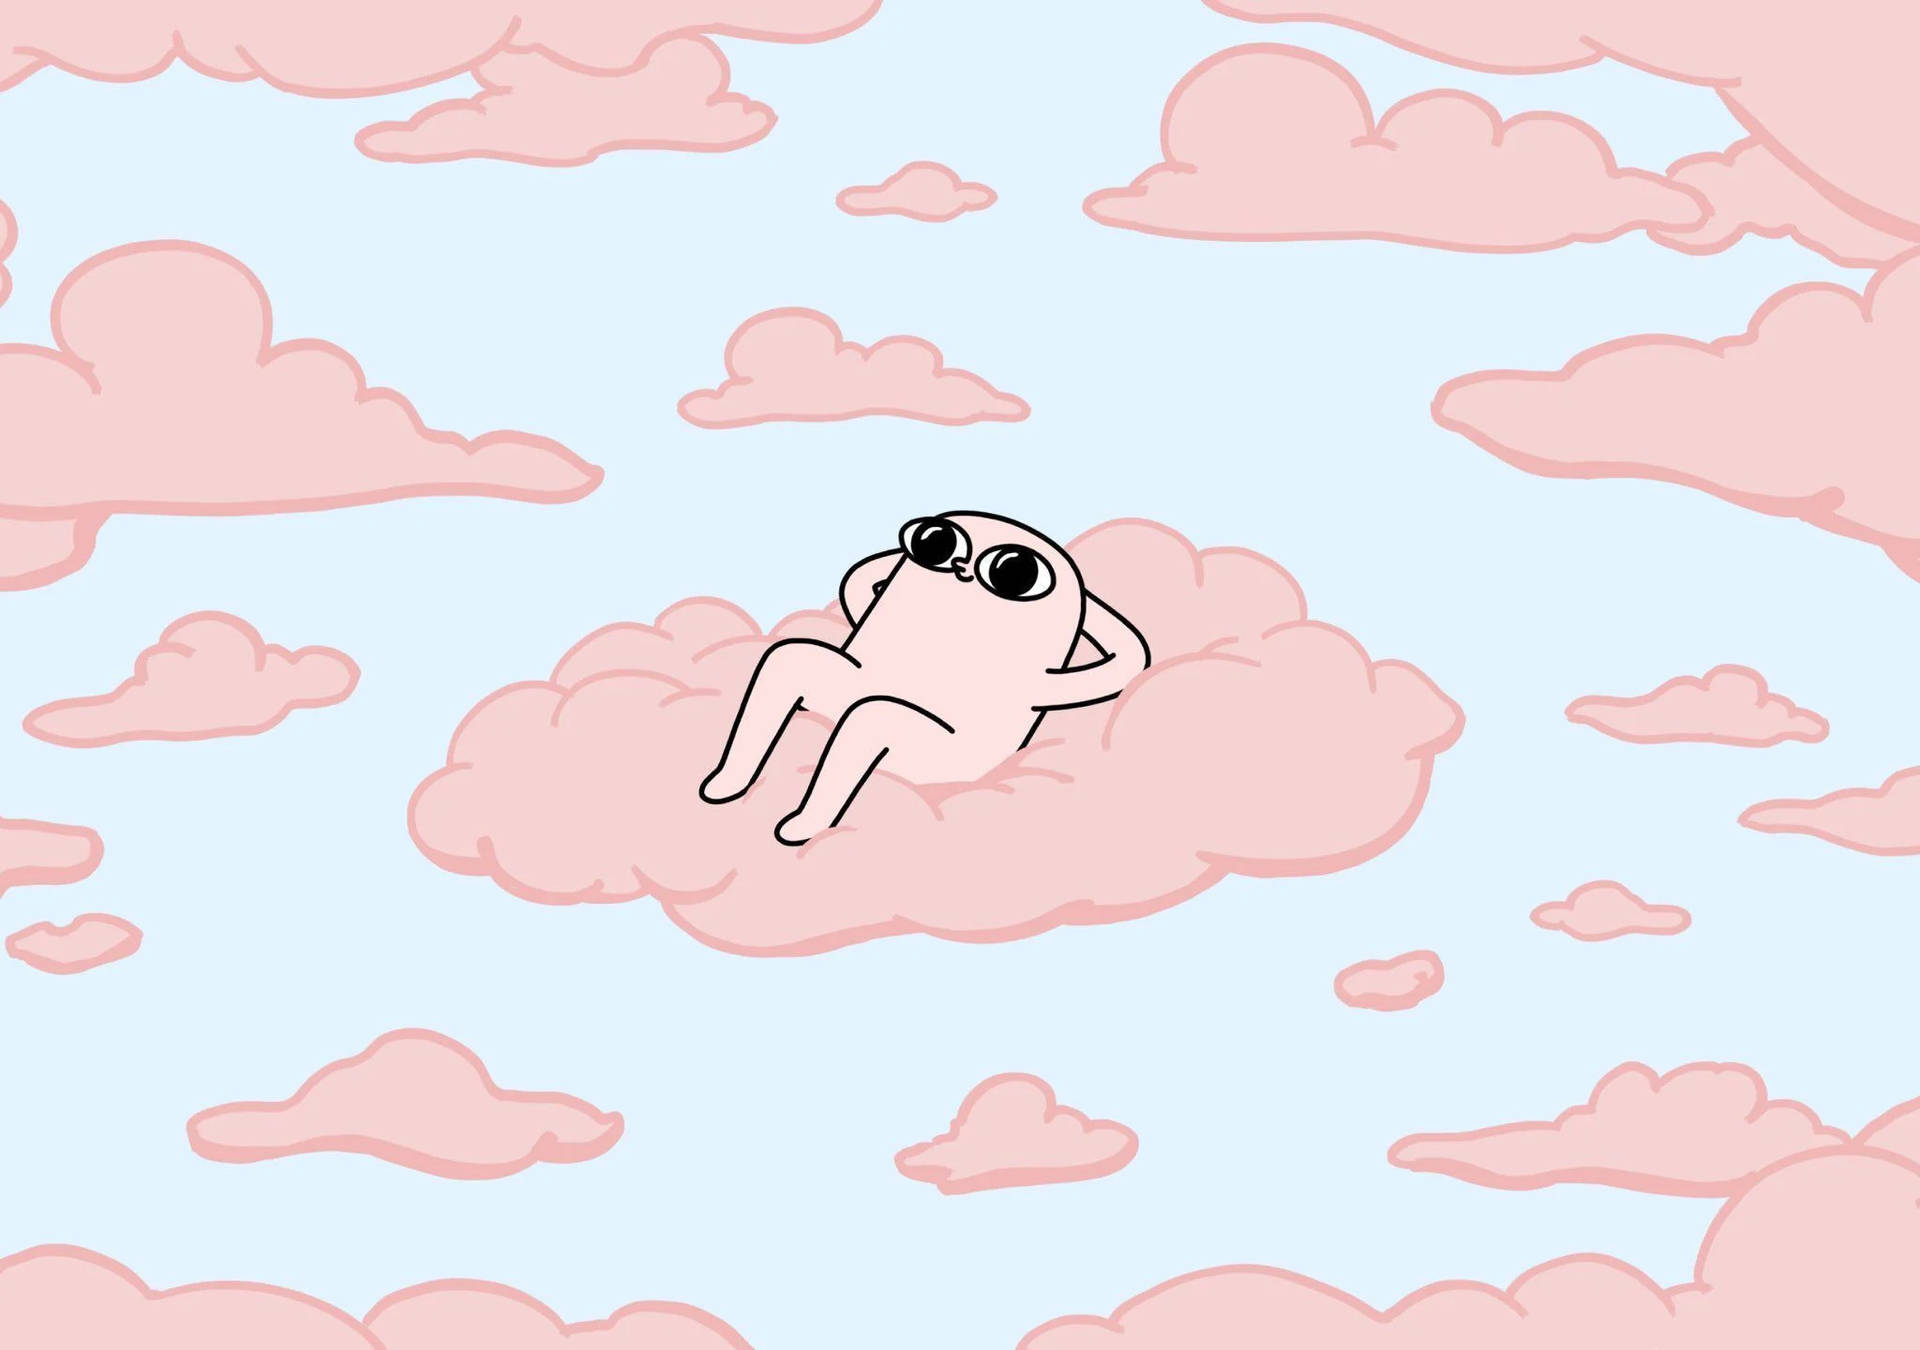 Download Aesthetic Cartoon Chilling Ketnipz Character In Sky Wallpaper |  